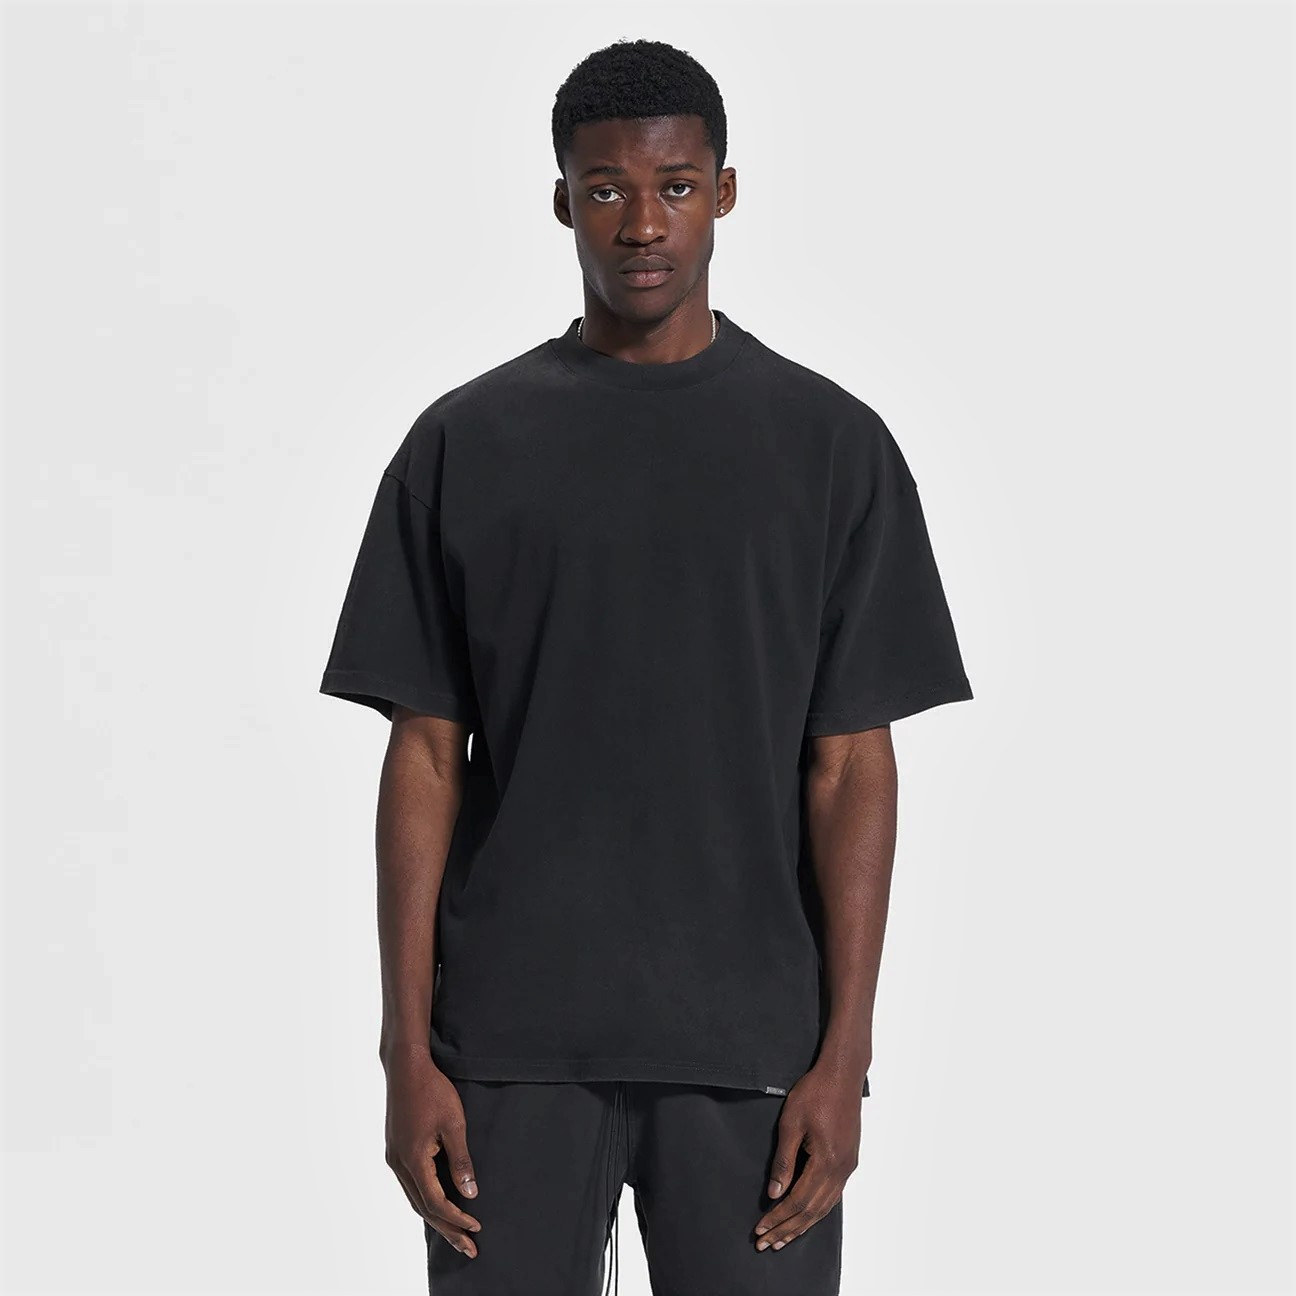 Represent Blank T-Shirt in Off Black M